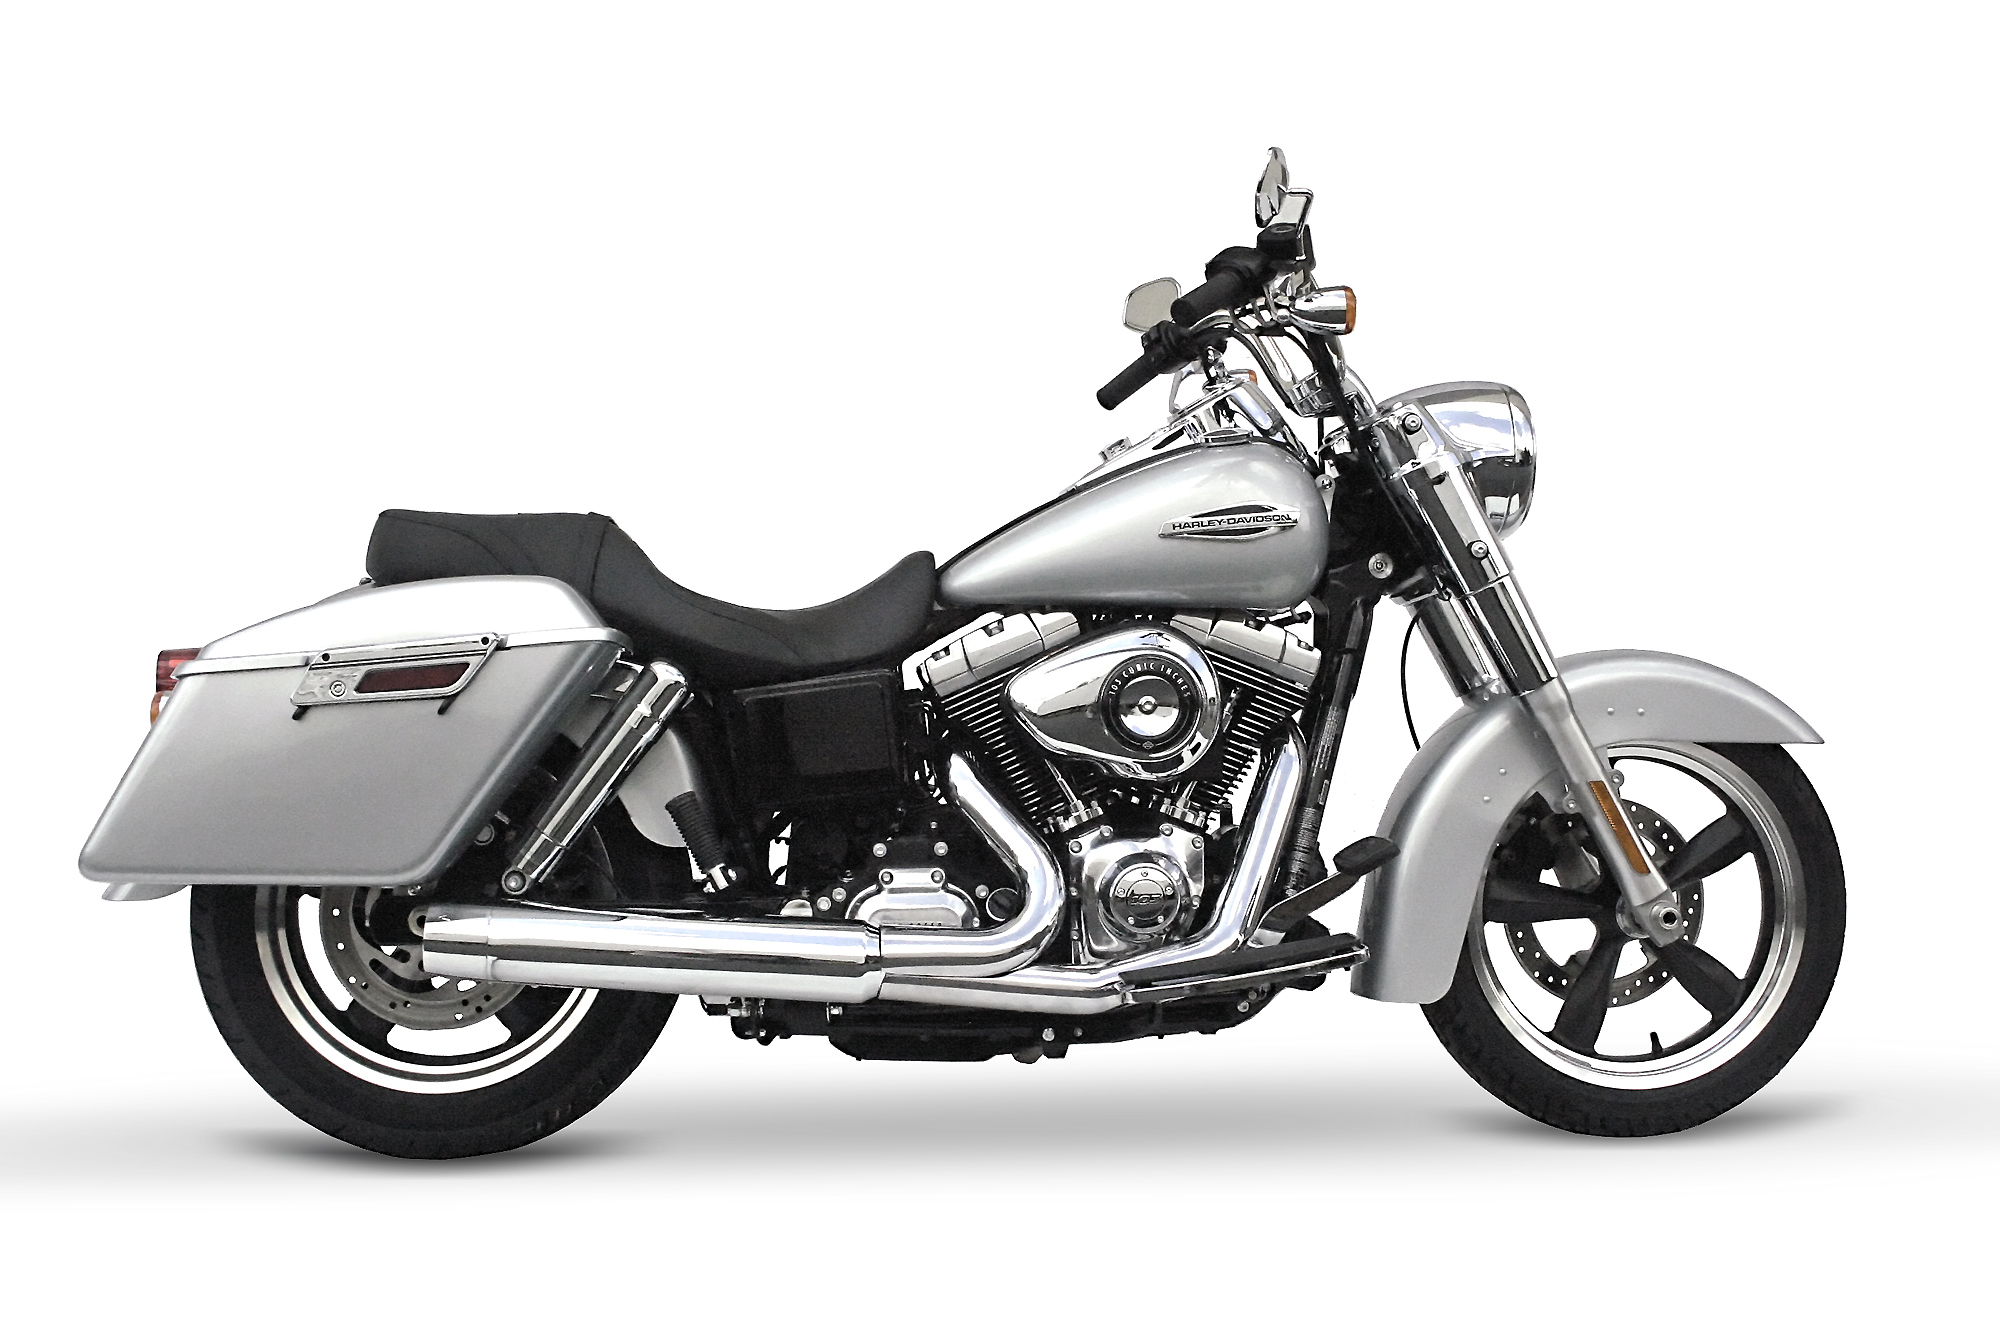 POWERFLOW III TWO INTO ONE EXHAUST FOR 2012 HARLEY-DAVIDSON DYNA